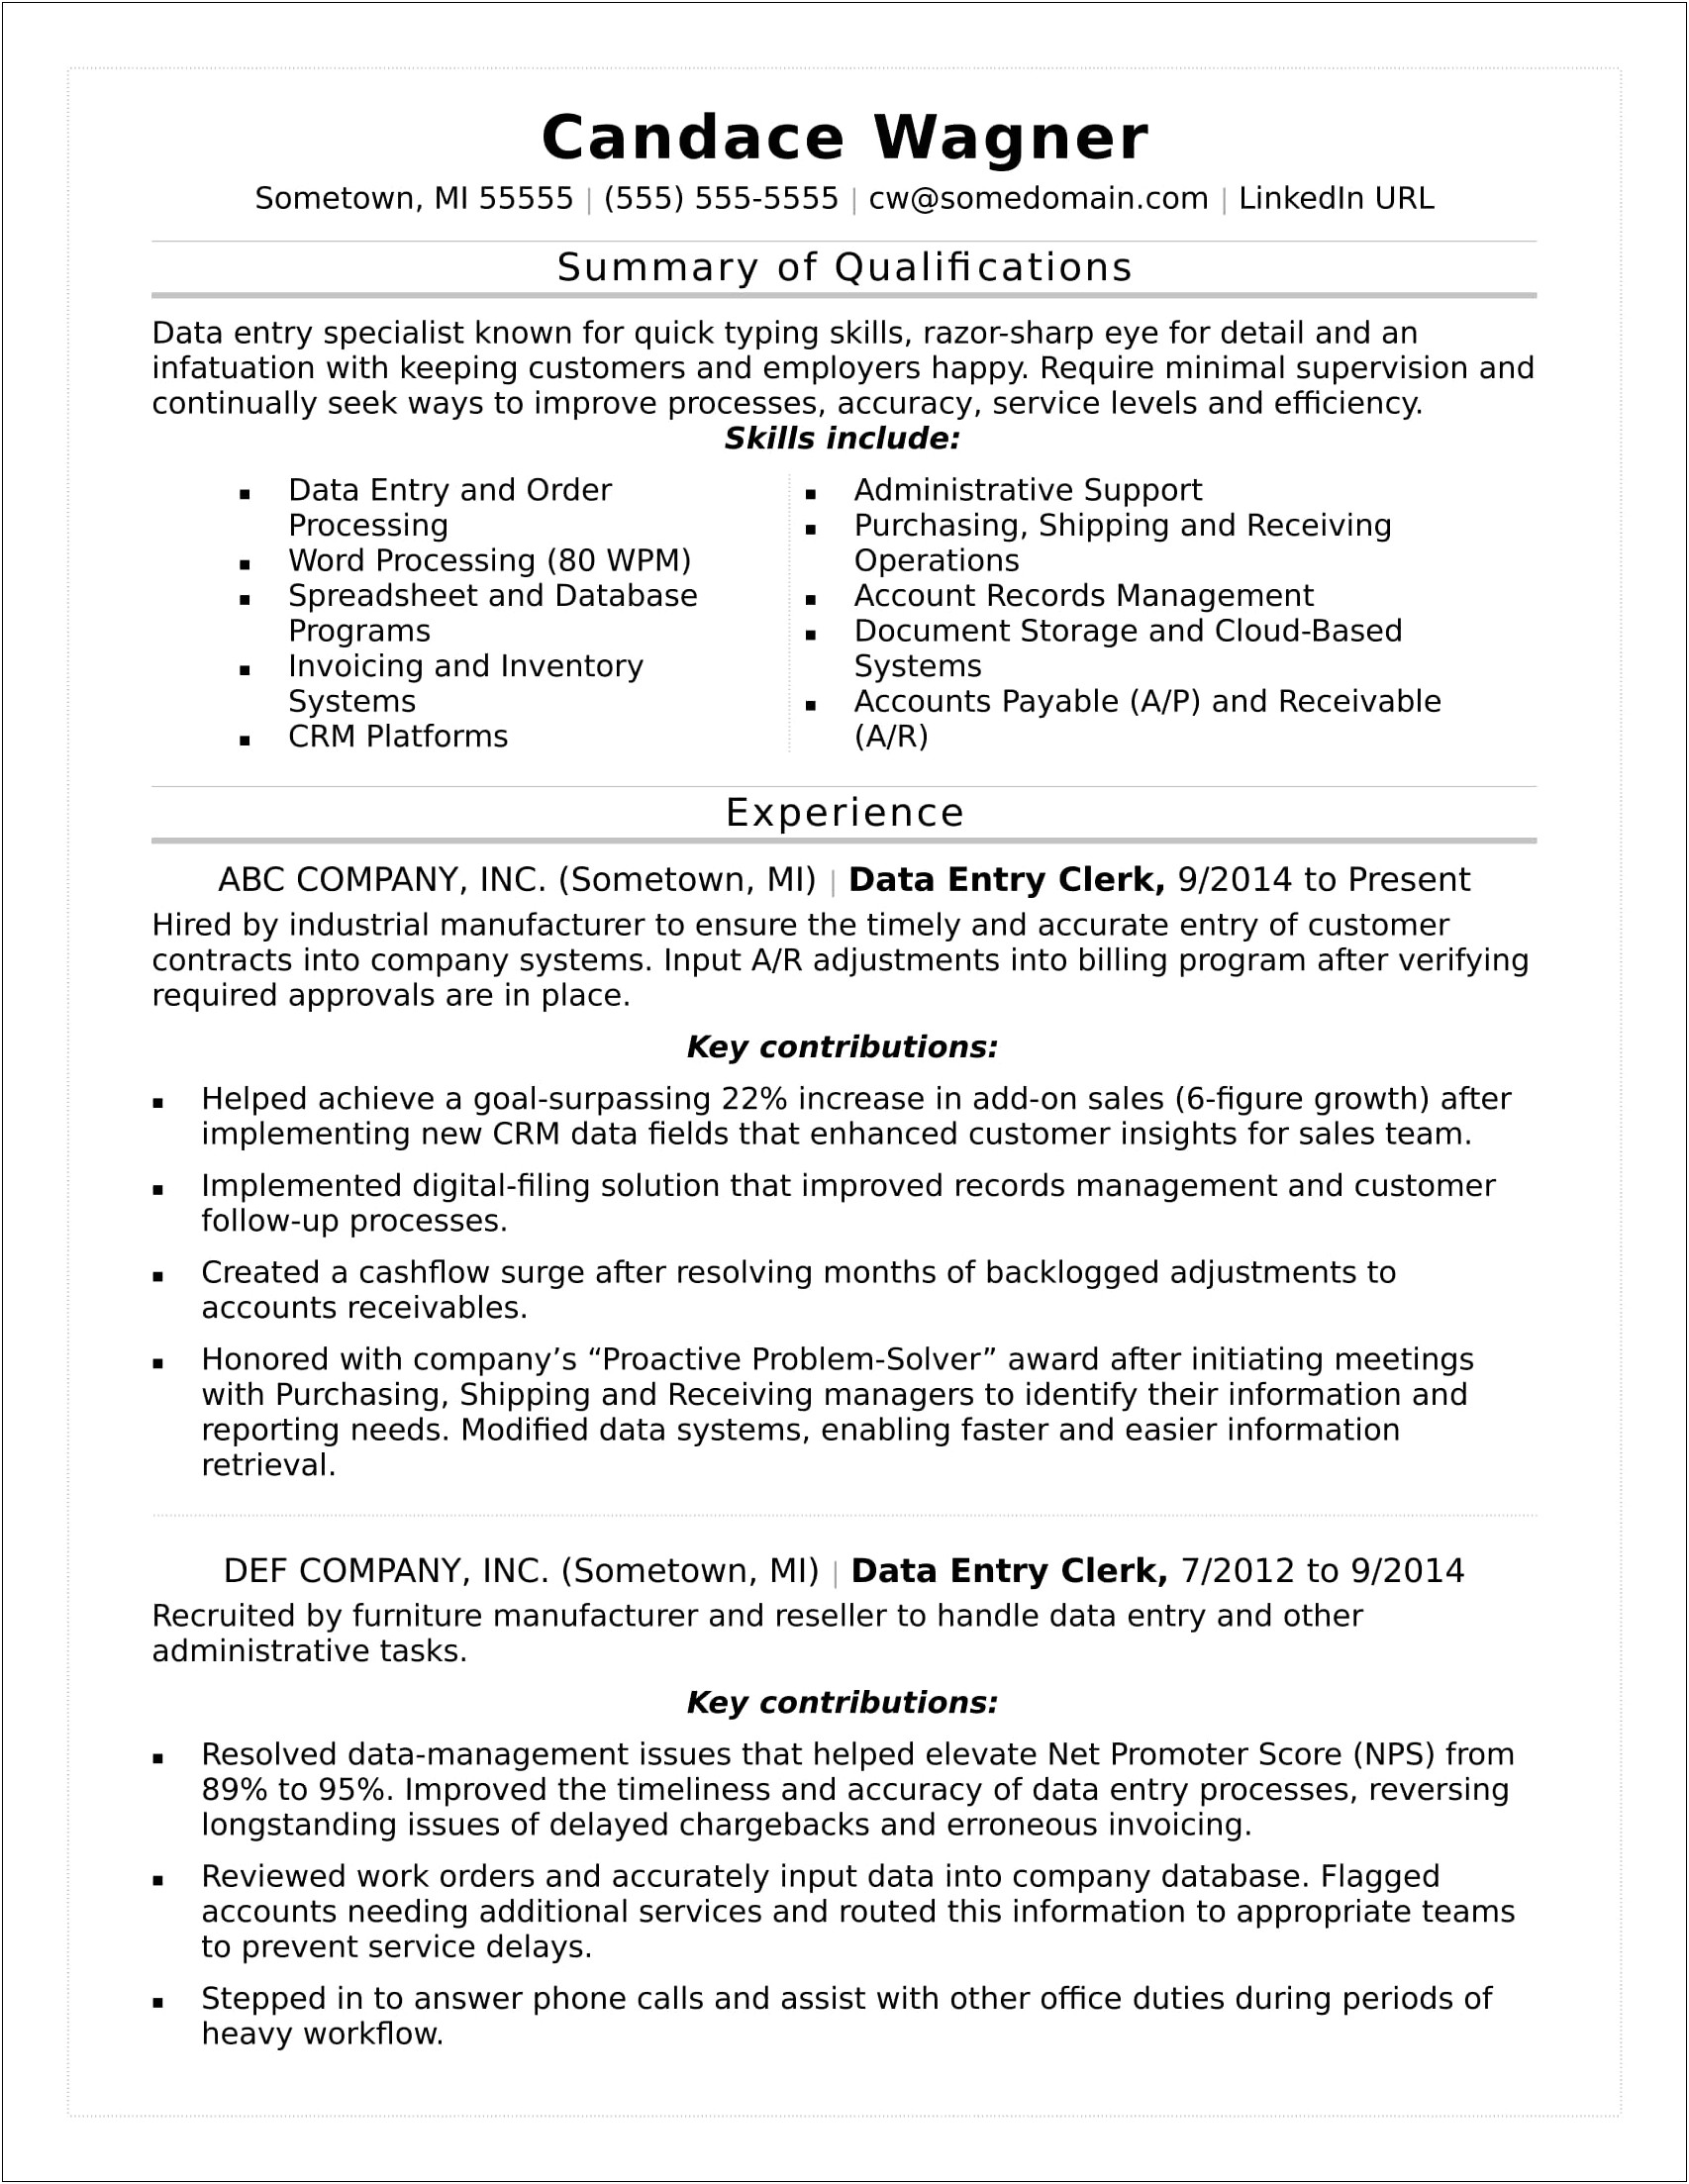 Where To Put Summary In Resume